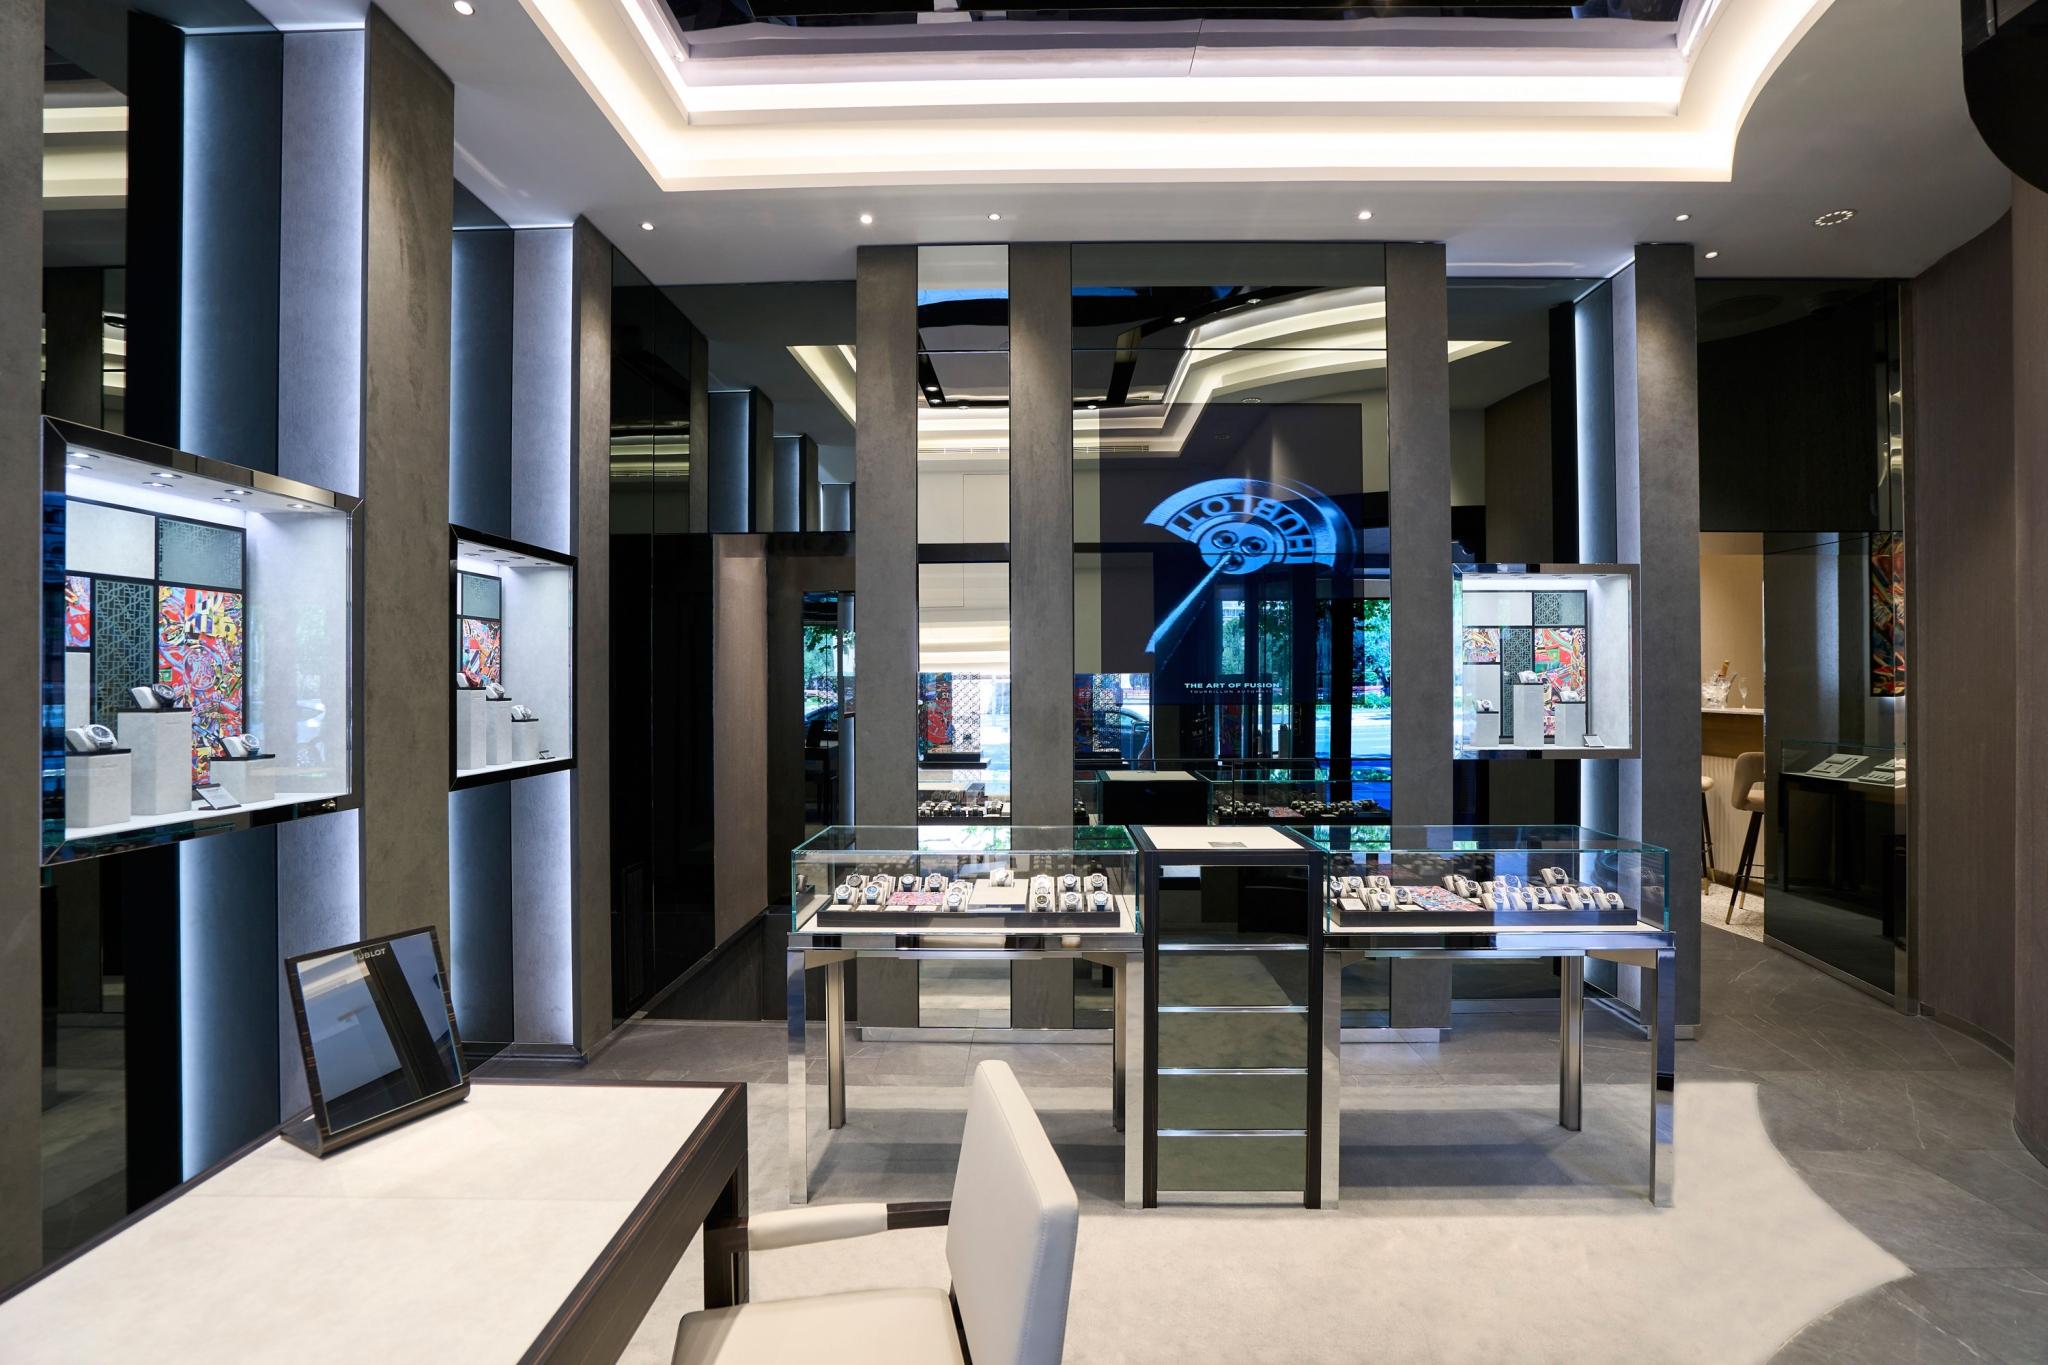 Hublot Opens New Boutique In Madrid